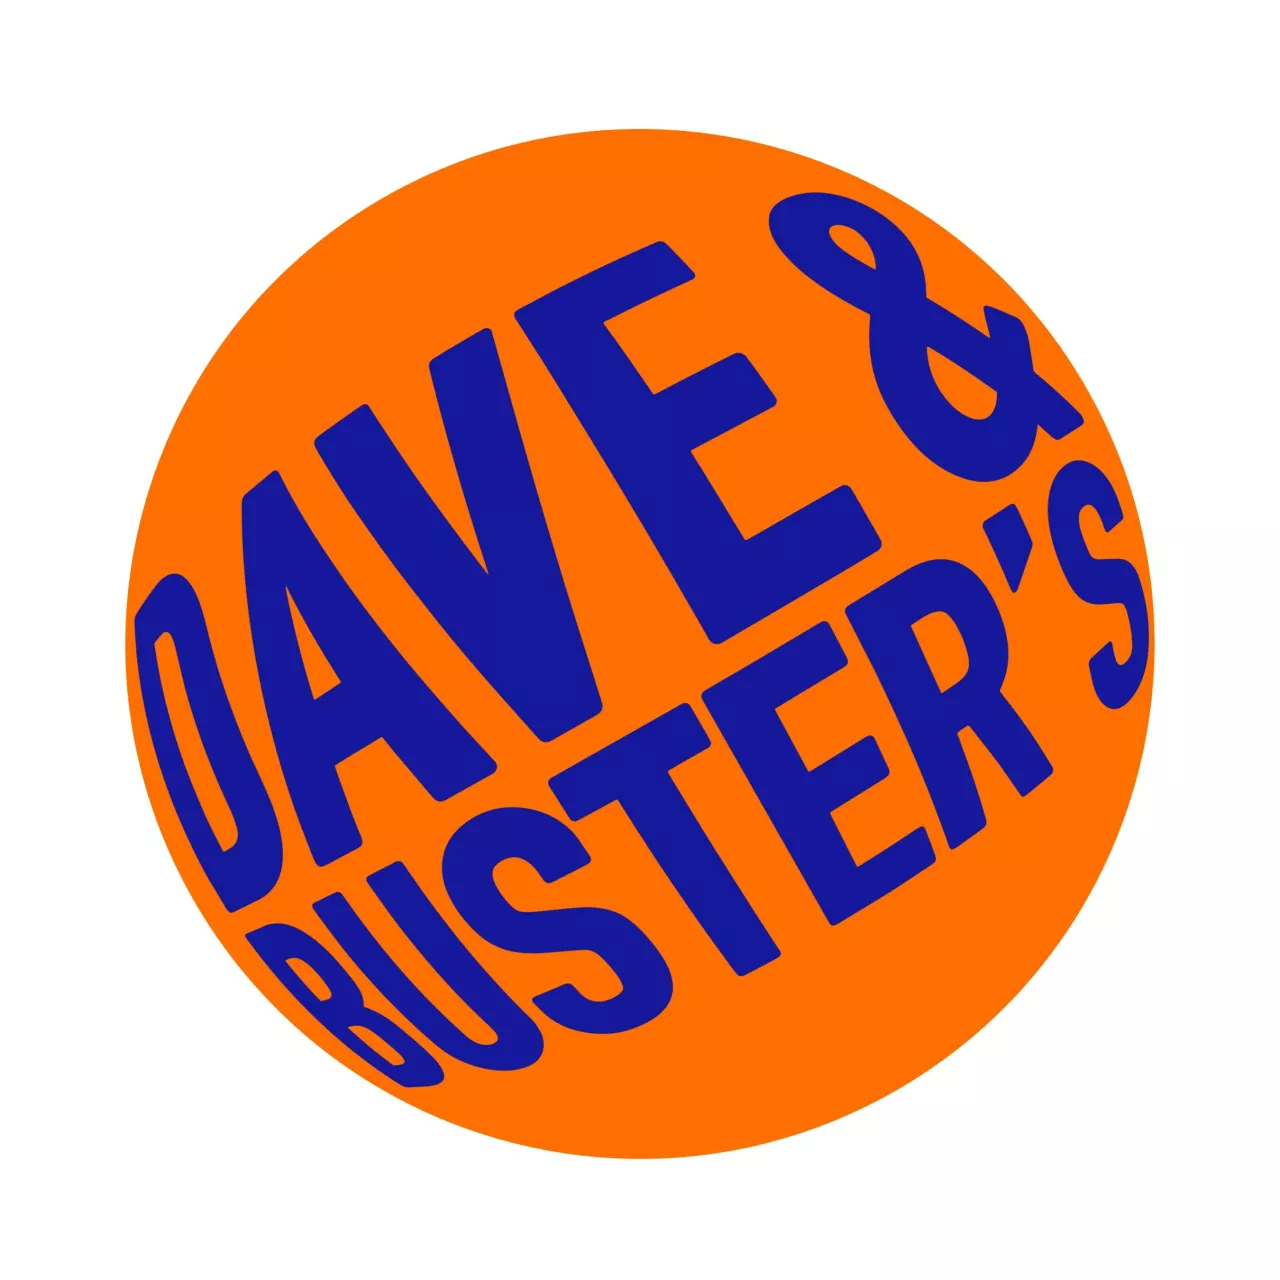 Dave & Buster's Logo (Dave & Buster's) img#1